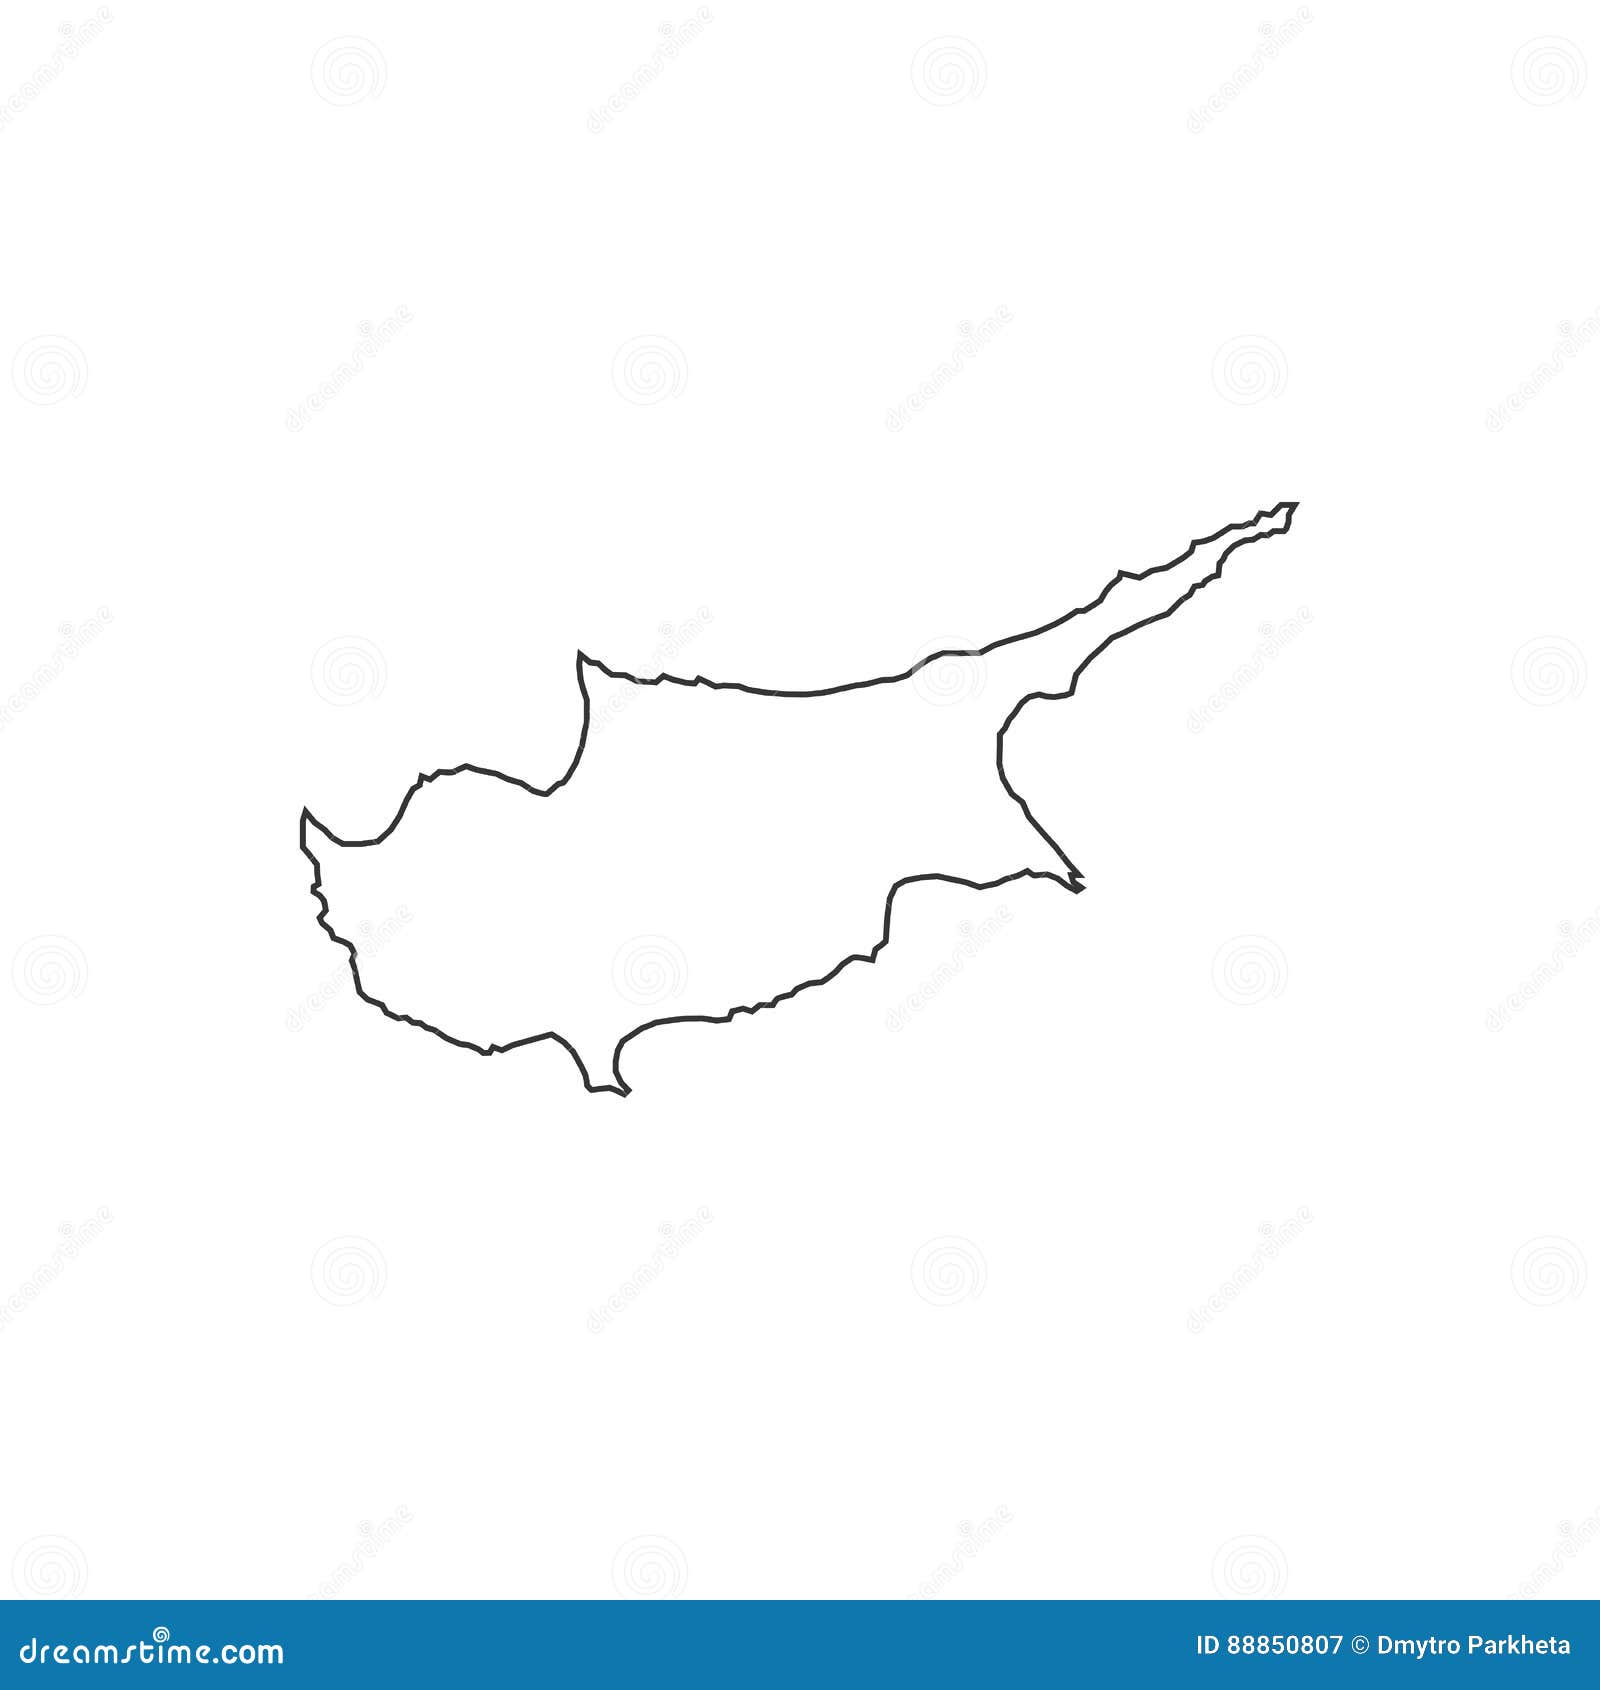 Cyprus map silhouette stock vector. Illustration of area ...